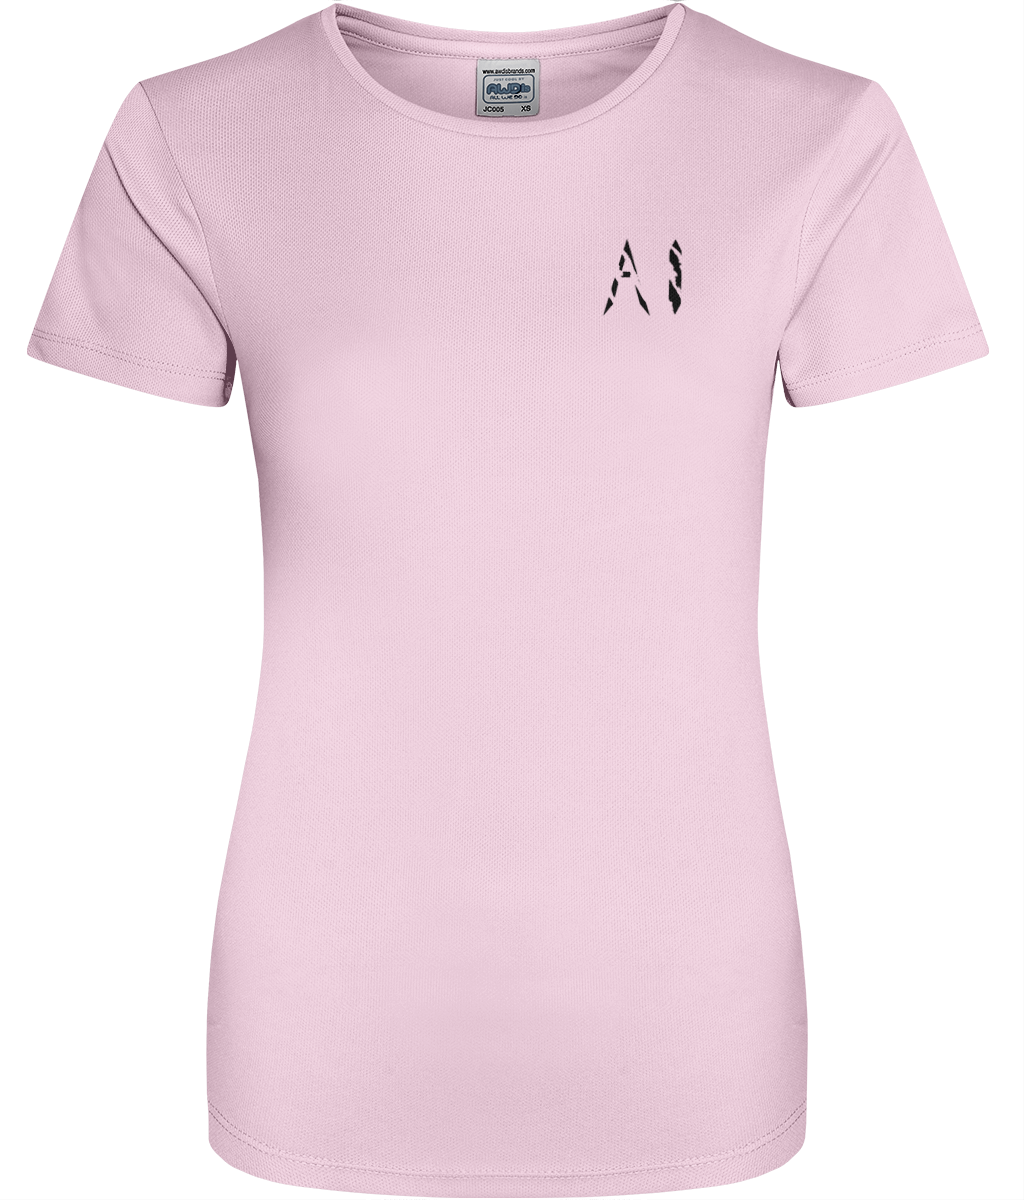 Womens light pink Athletic Sports Shirt with black AI logo on left breast